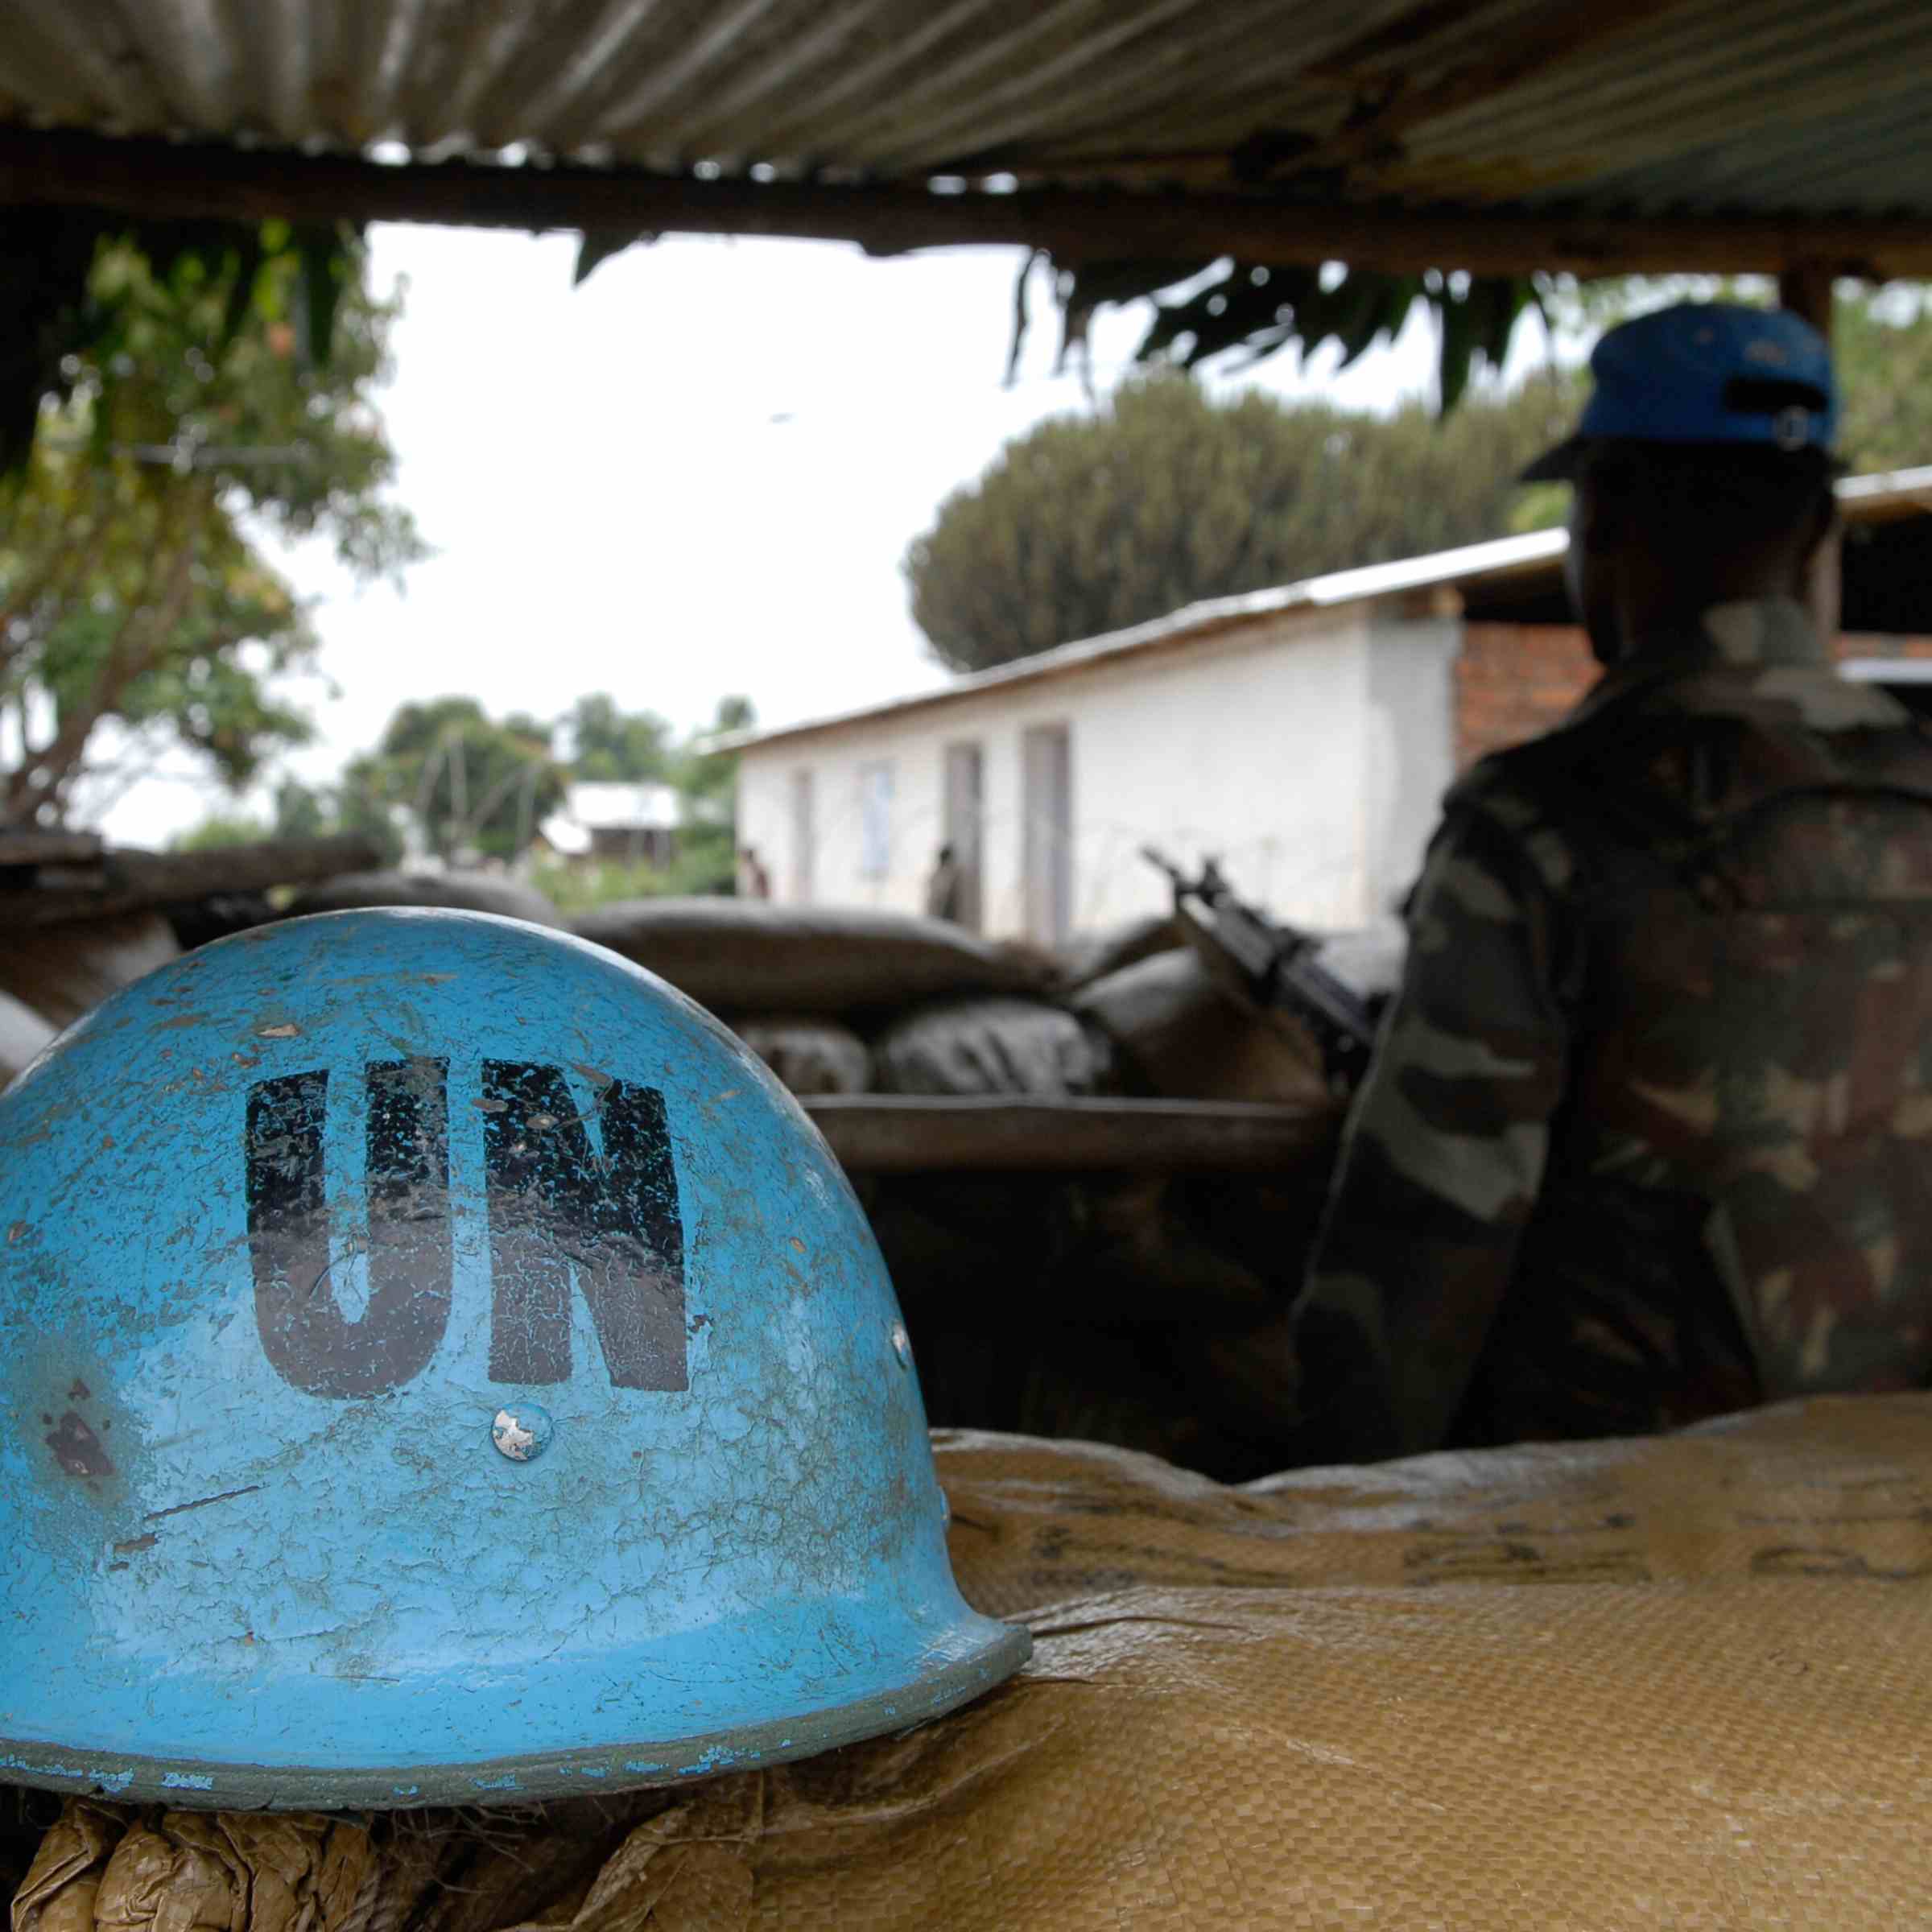 Picture shows a blue helmet marked with the letters 'UN'. In the background is soldier wearing camouflage.